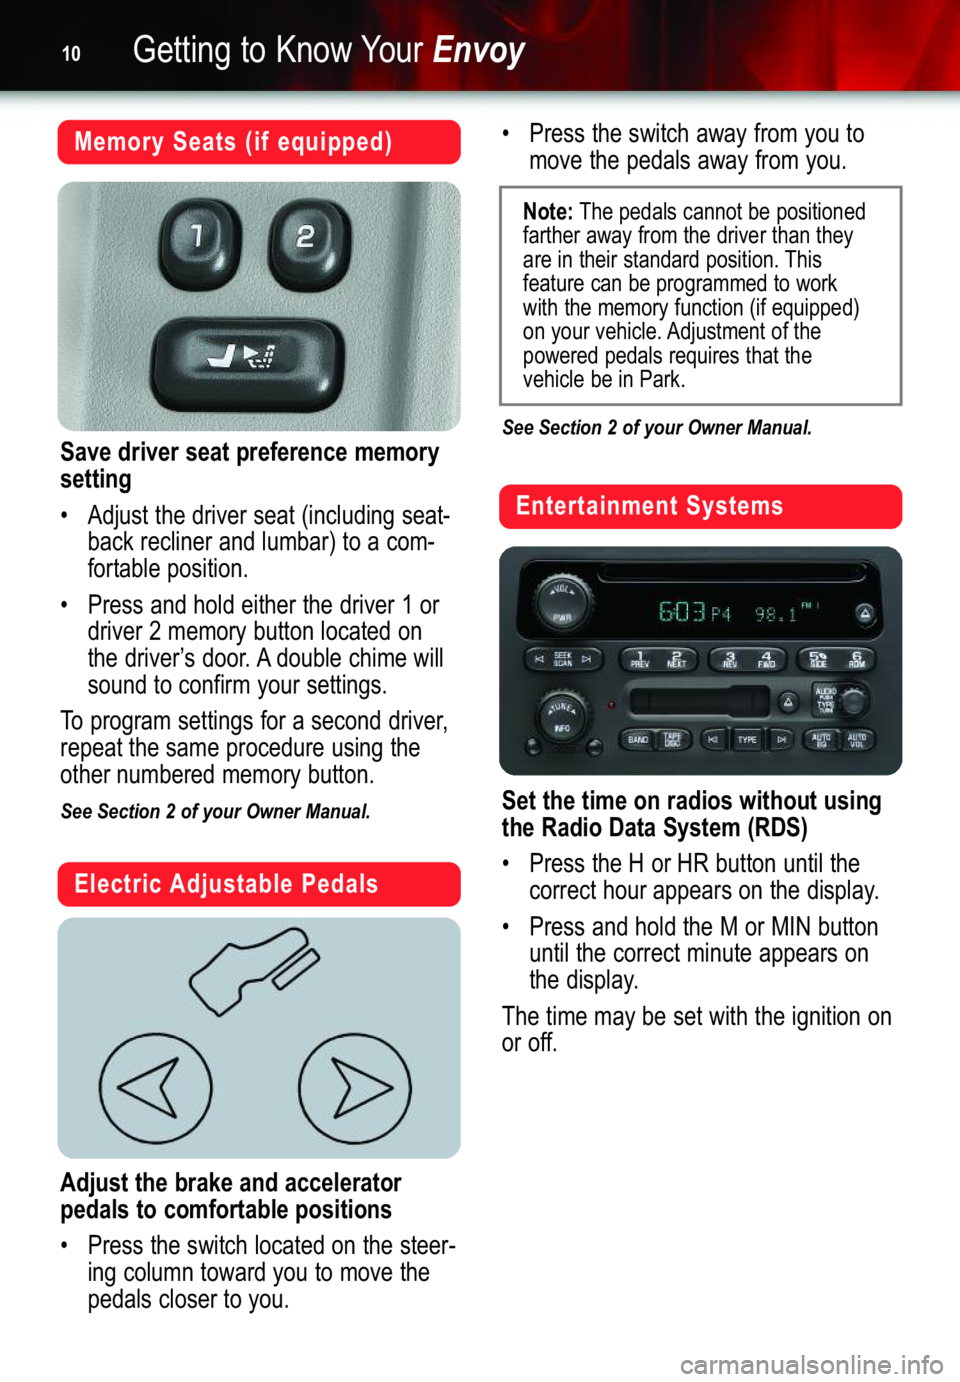 GMC ENVOY 2006  Get To Know Guide Getting to Know YourEnvoy10
Memory Seats (if equipped)
Save driver seat preference memory
setting
• Adjust the driver seat (including seat�
back recliner and lumbar) to a com�
fortable position.
•